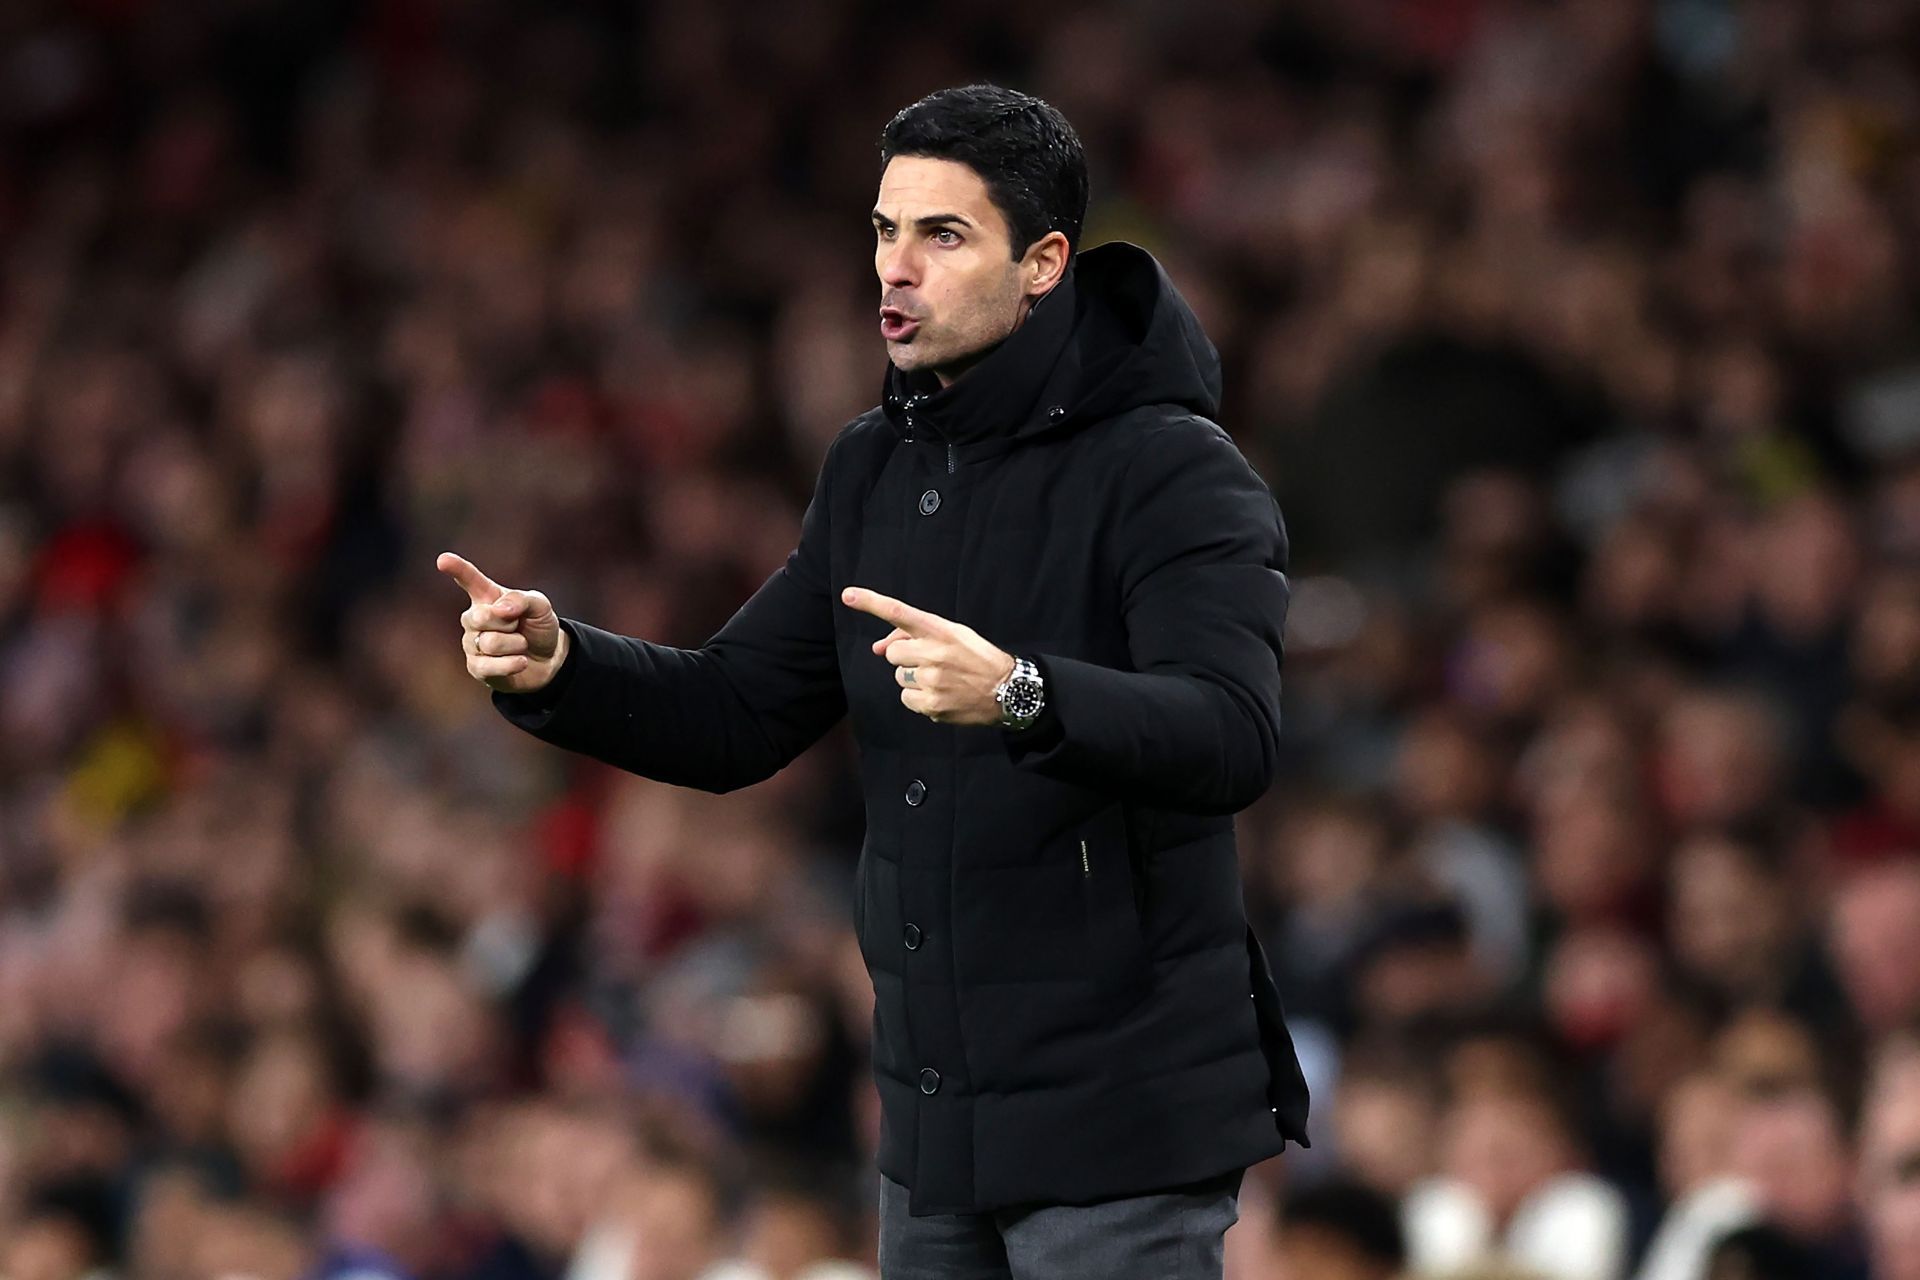 Mikel Arteta disagrees that the City clash is a title decider.